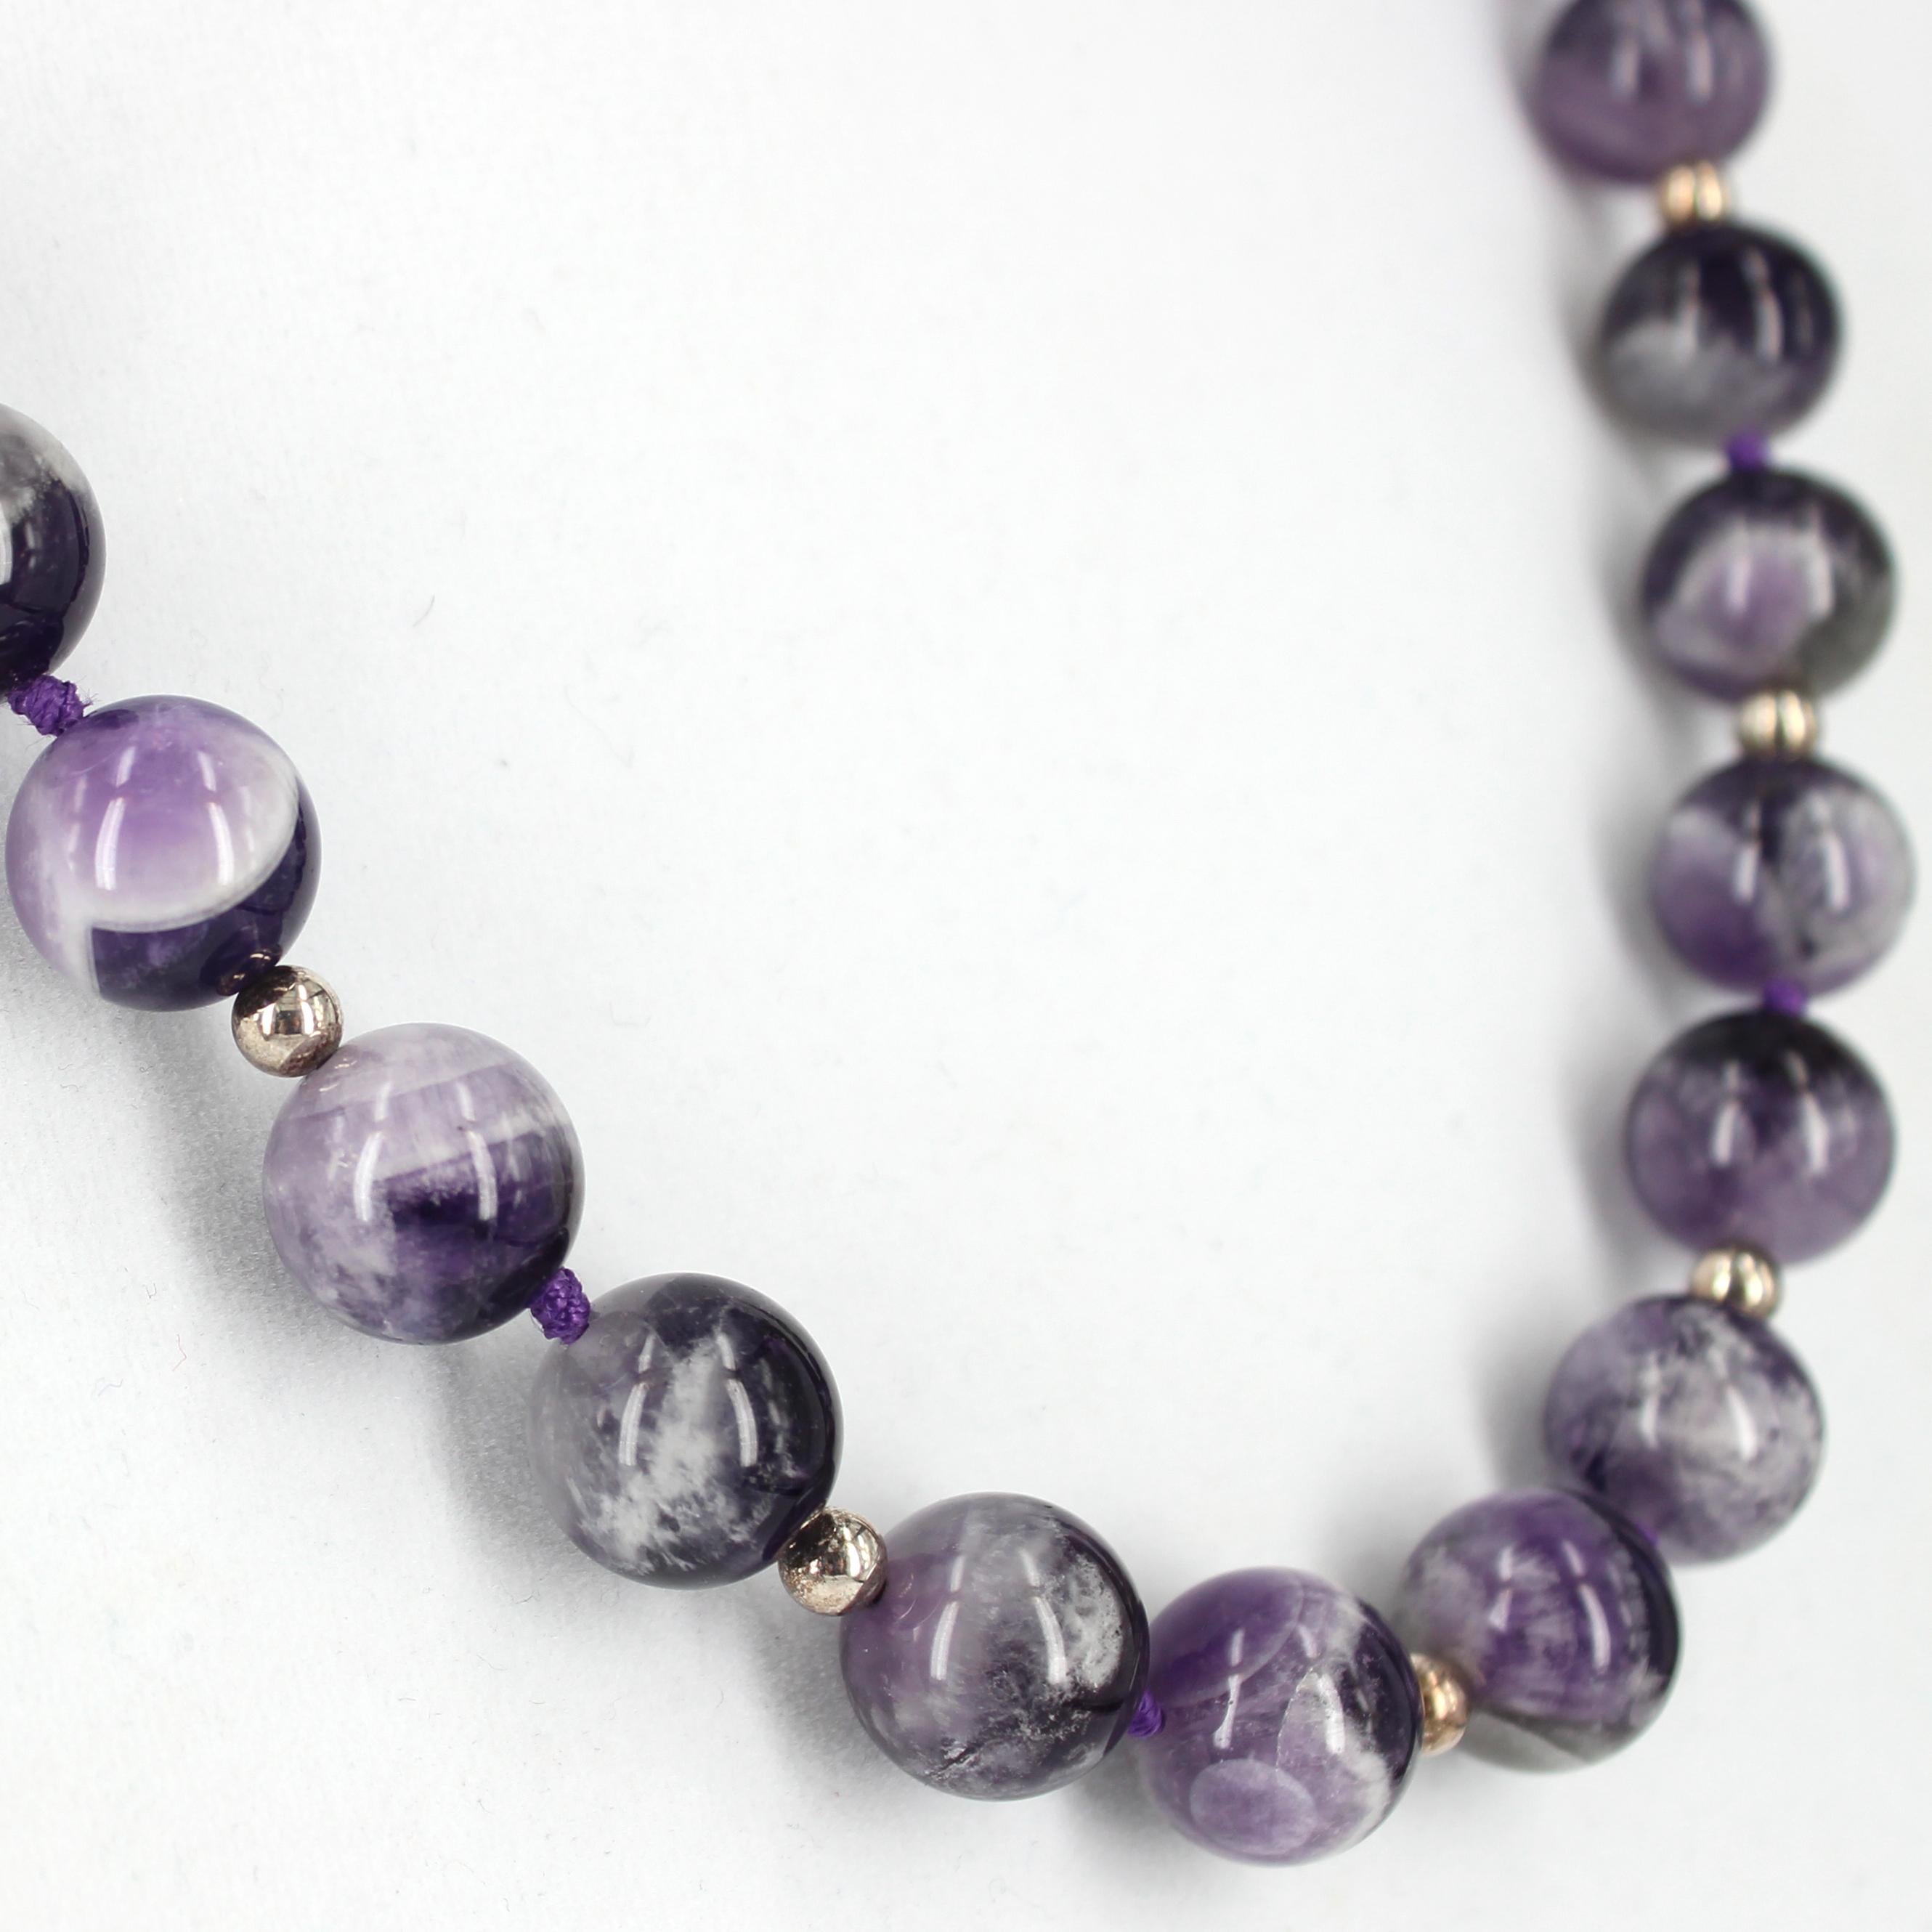 
Chevron Amethyst  14mm Polished Round Bead Necklace 54cm Knotted in Sections

Descriptions Chevron Amethyst  Round Beads 14mm 
                      Sterling Silver Round Beads 5mm 
                      Hook Clasp Sterling Silver 